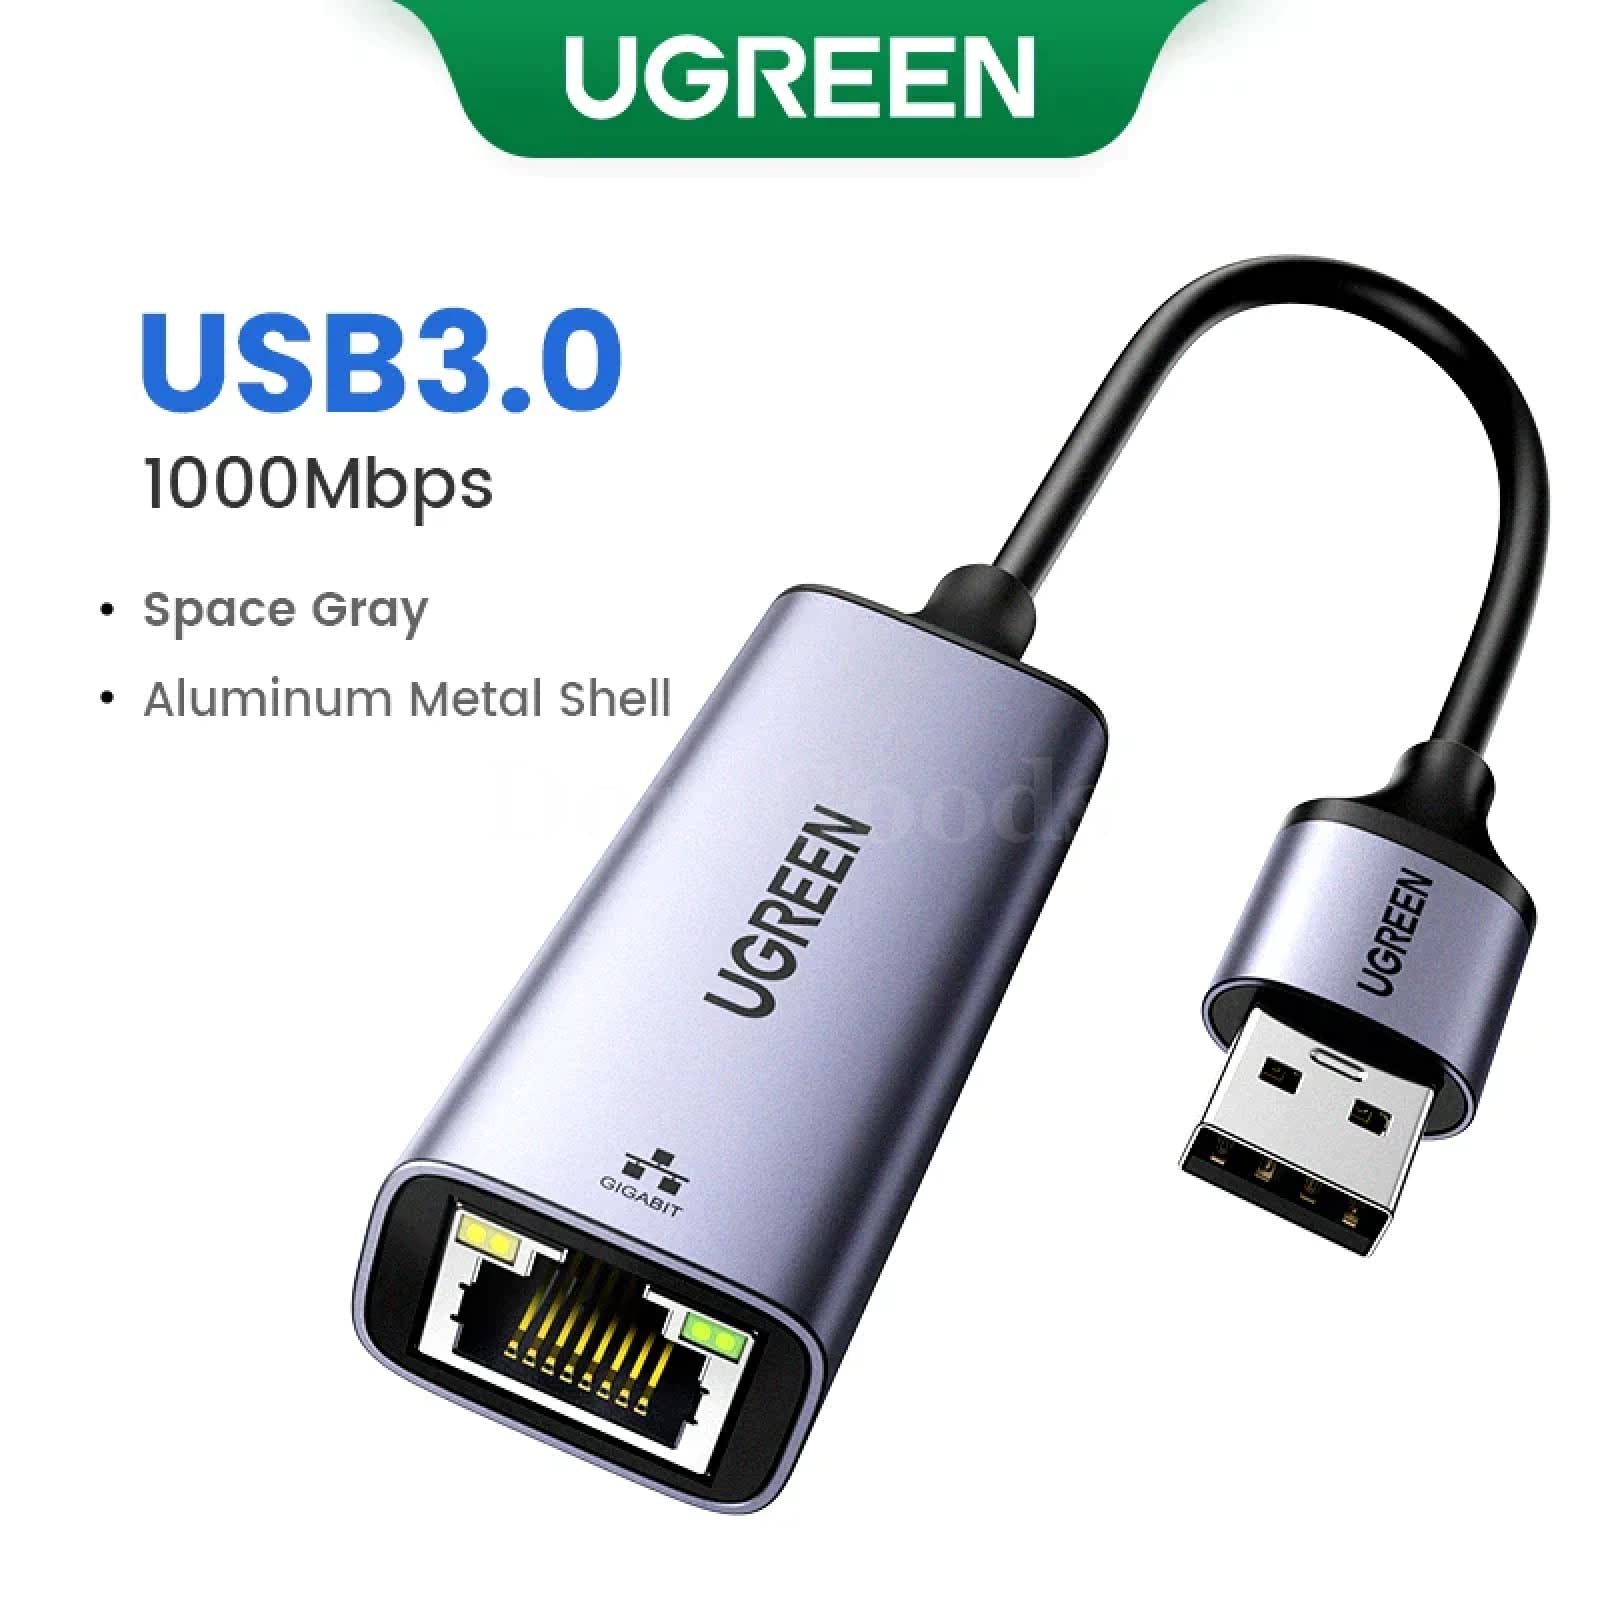 Ugreen Usb 3.0 Ethernet Adapter Network Card For Win 10 Pc Xiaomi Mi Box Usb-A Space Gray 301635